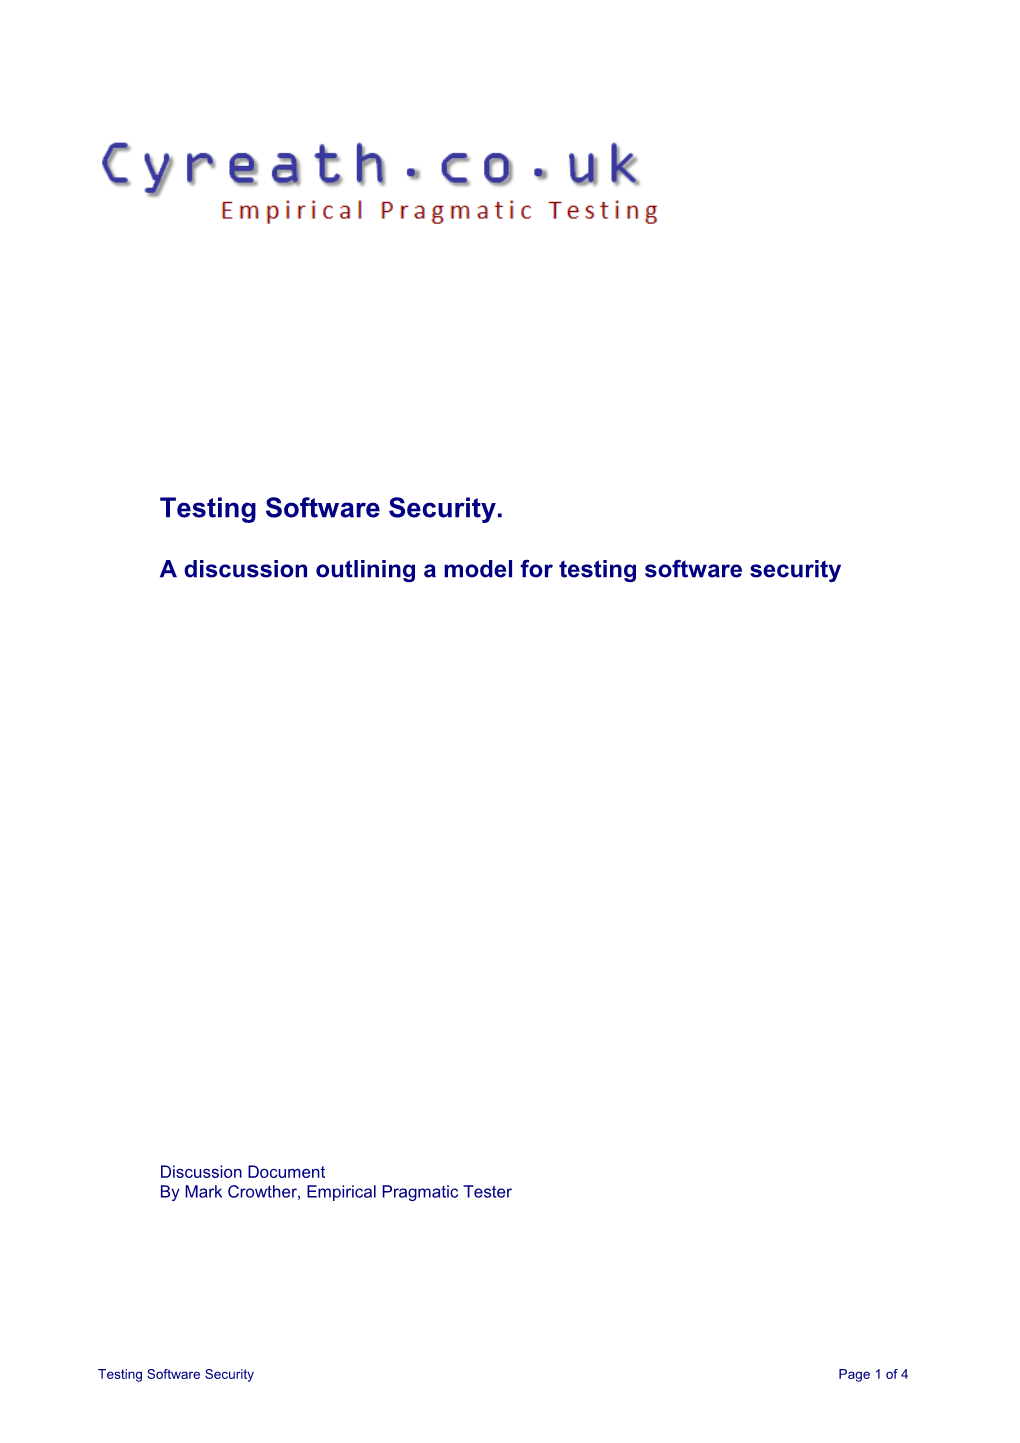 Testing Software Security